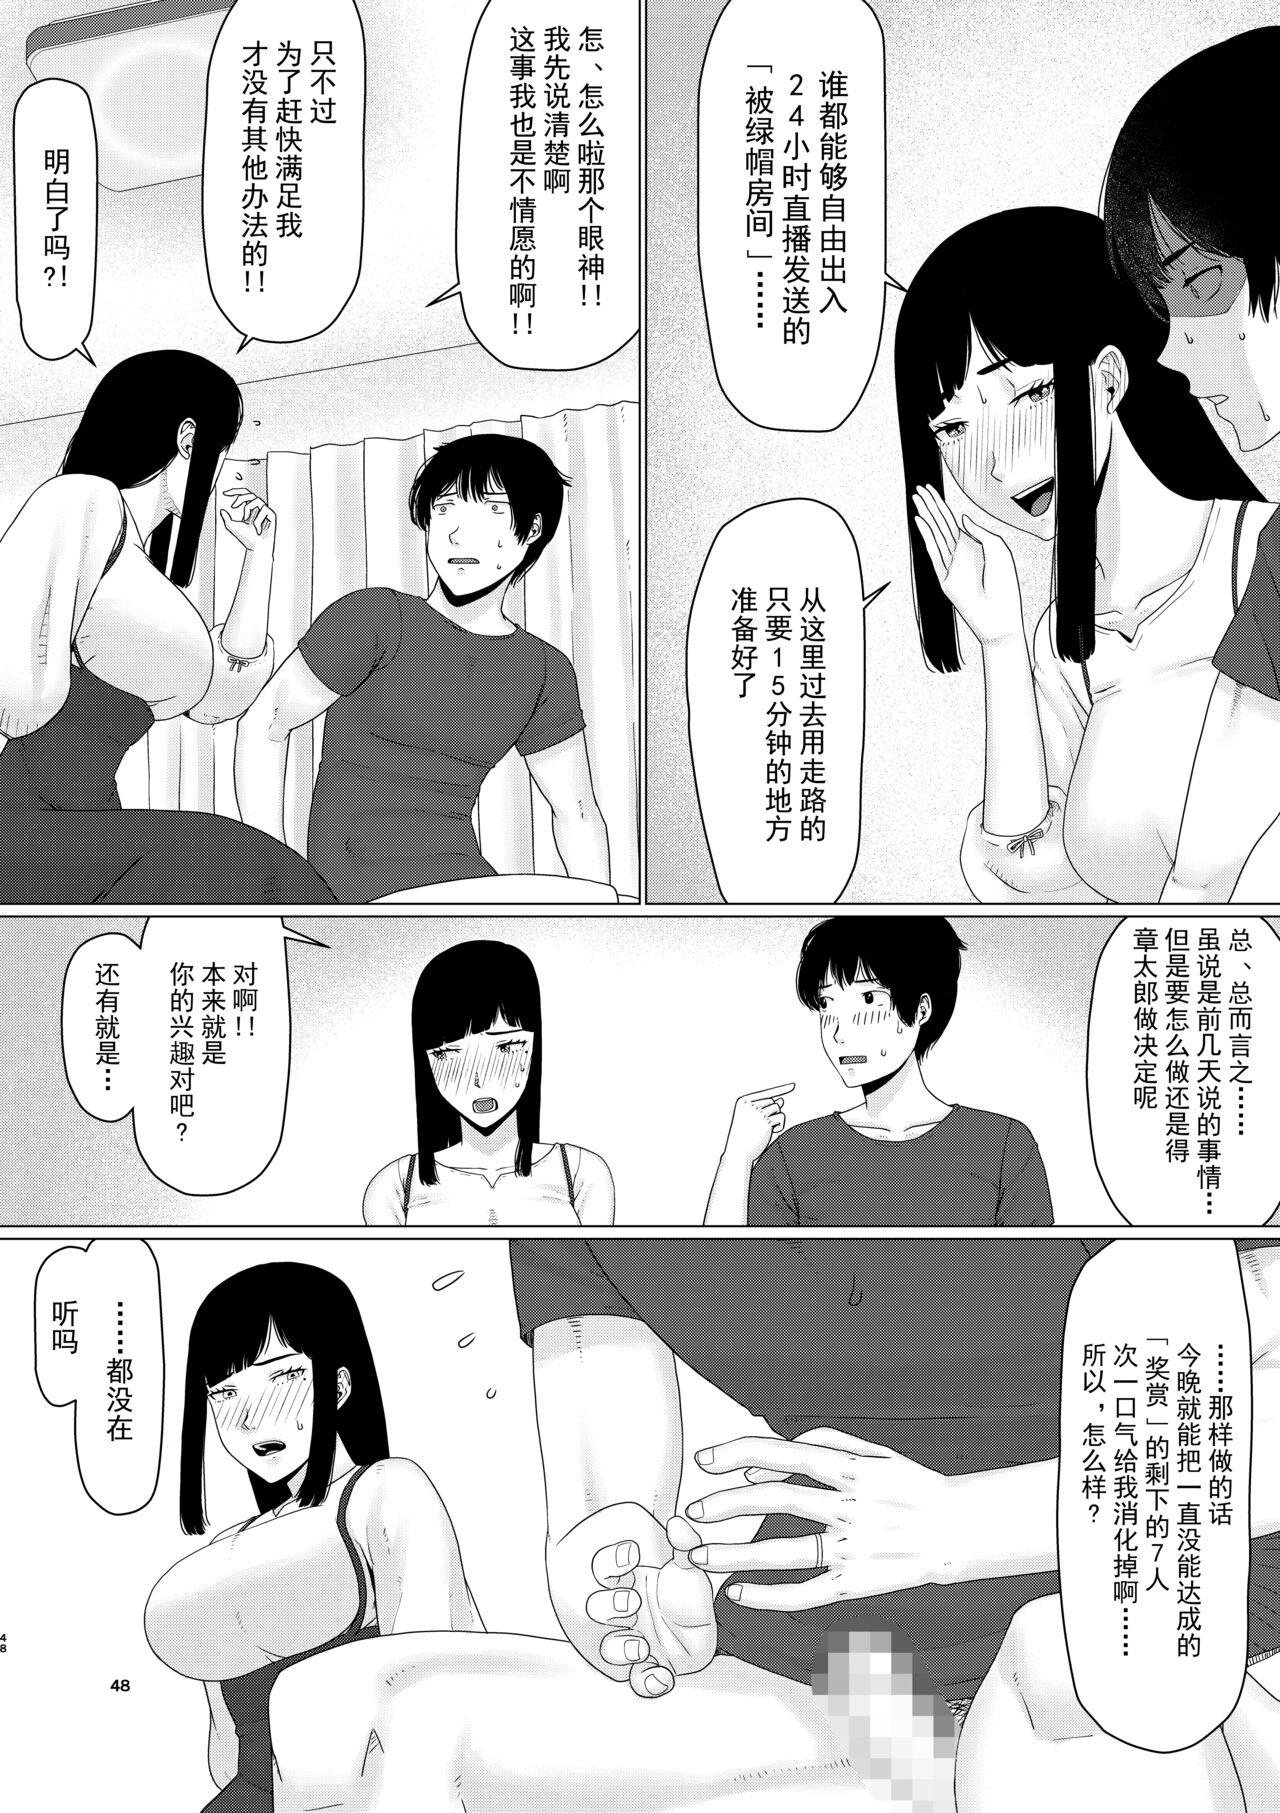 (Dōjinshi) Chieri can't lose!3 -Perverted toilet wife who fertilizes anyone's sperm with her husband's approval- Volume 1 (Original) [Chinese][超勇漢化組] 48